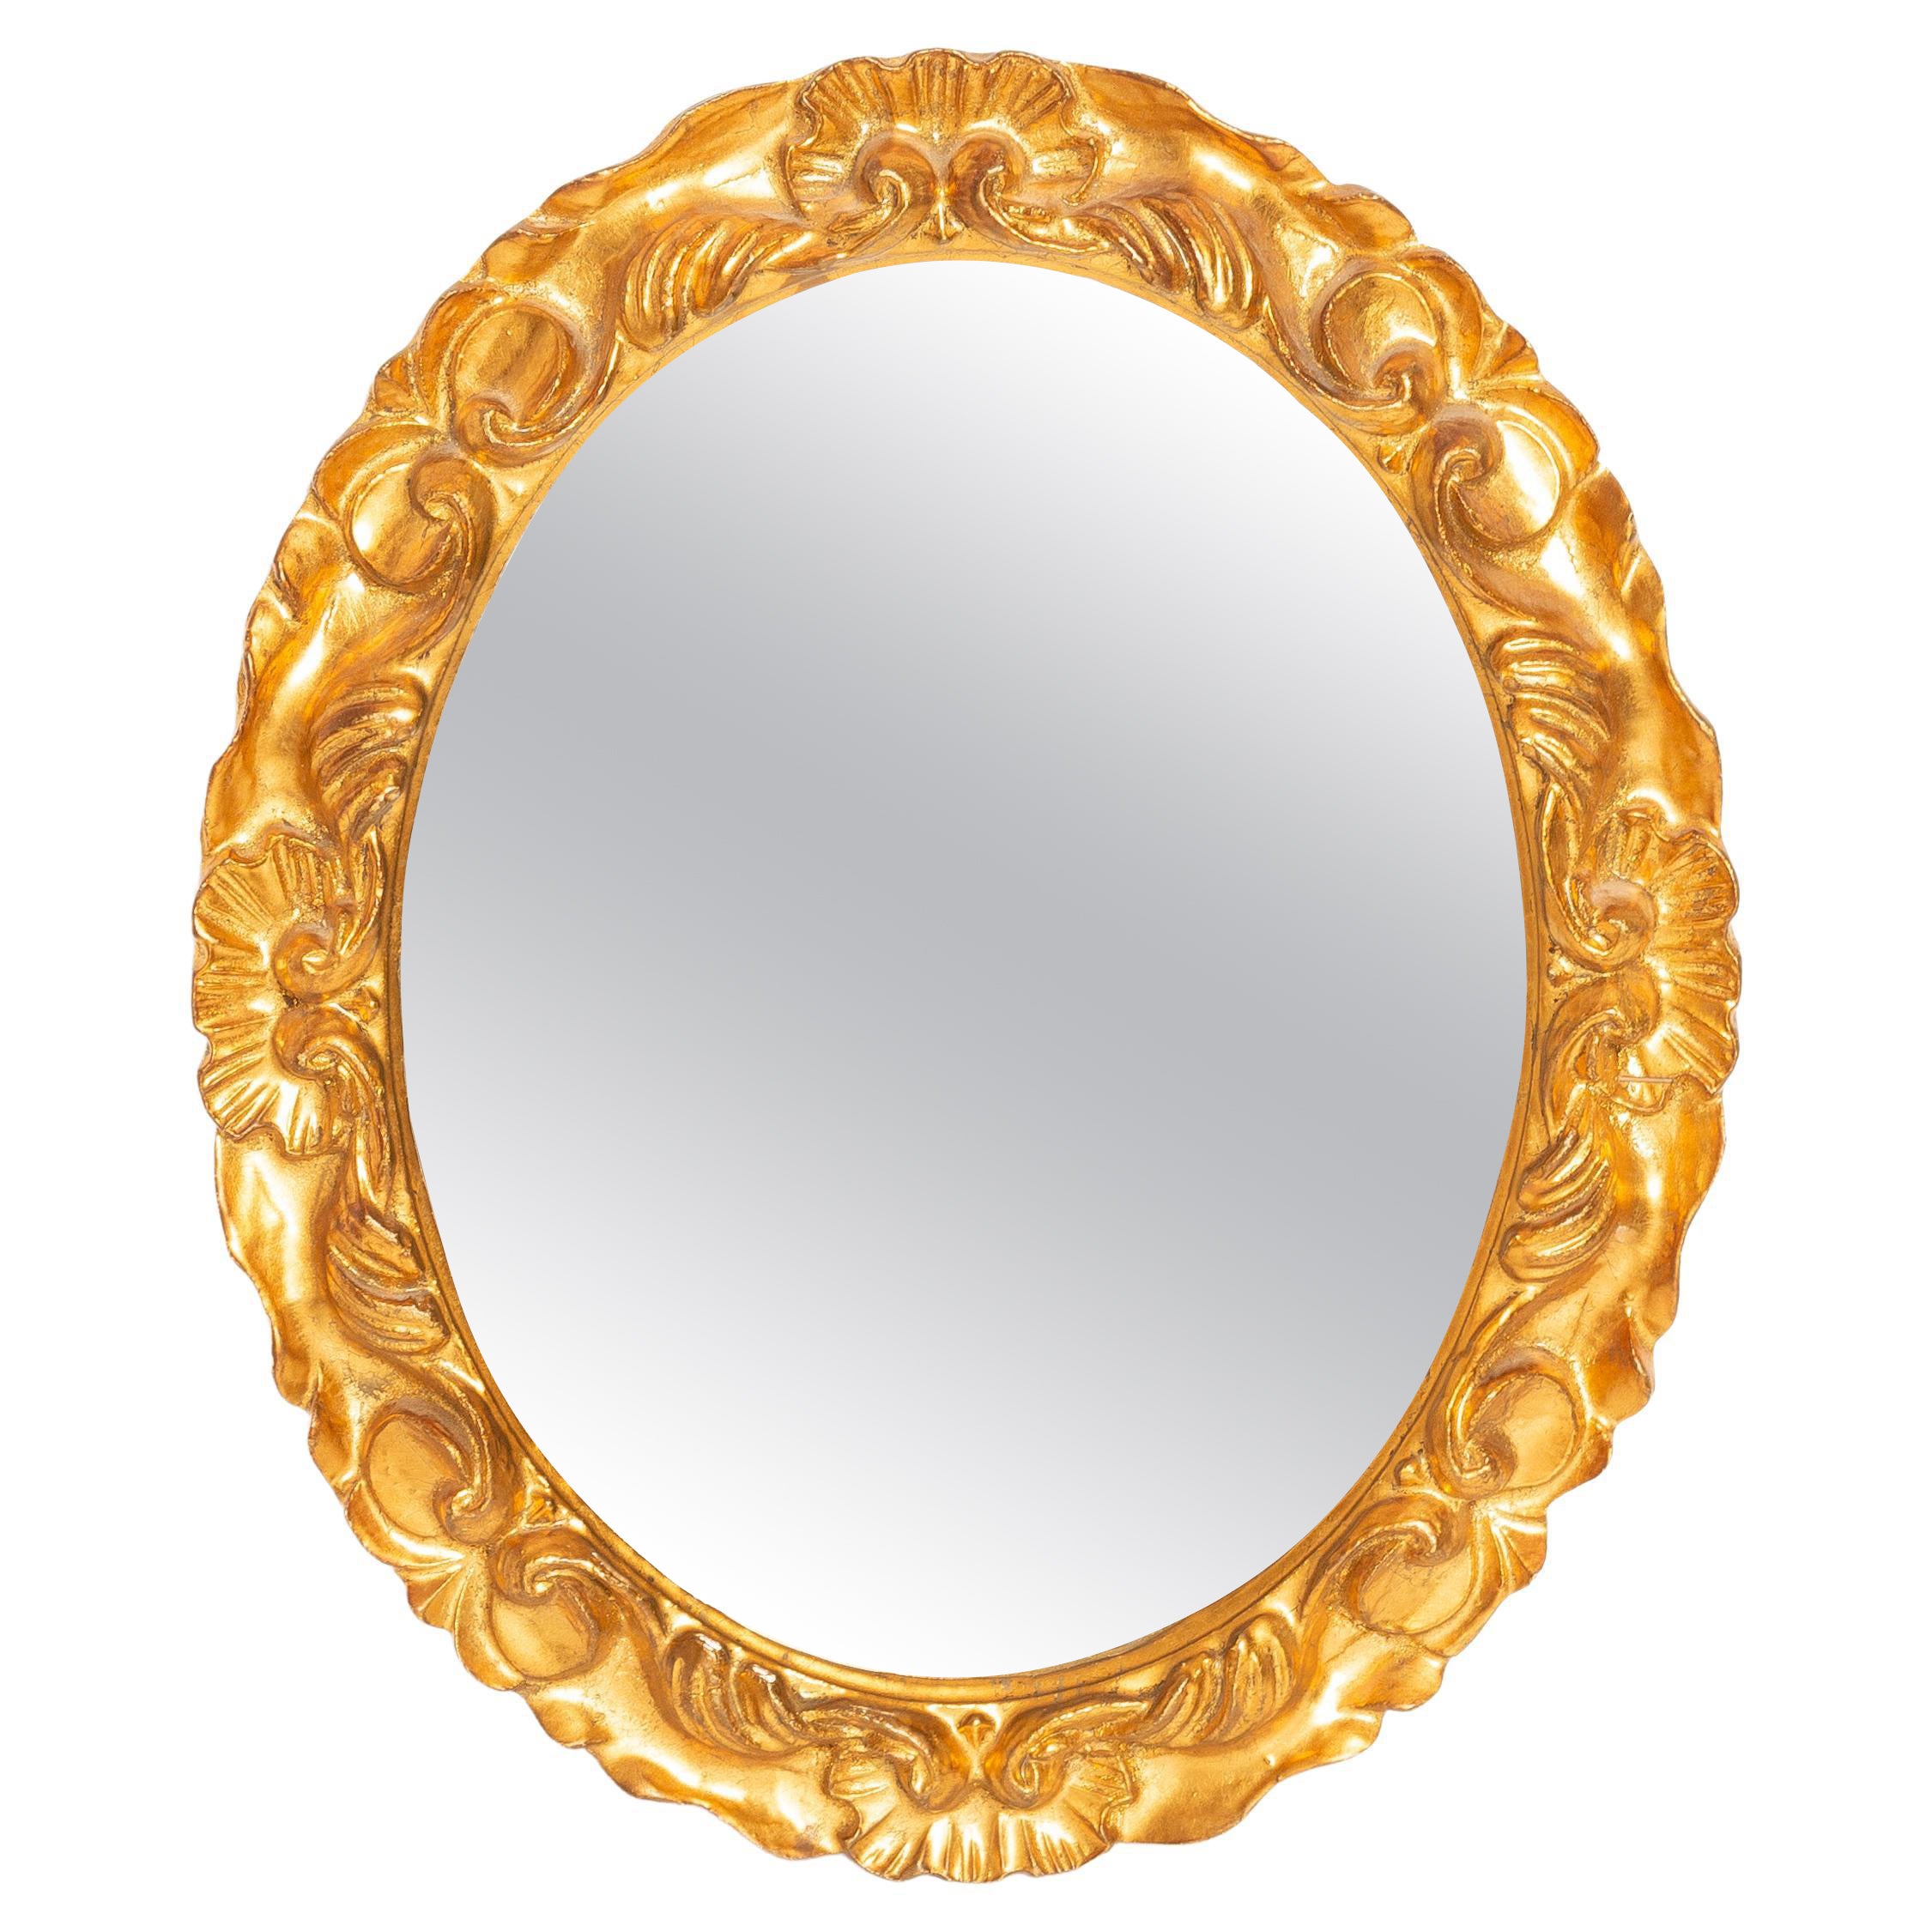 Vintage Small Oval Gold Decorative Wood Mirror in Flowers Frame, Italy, 1960s For Sale